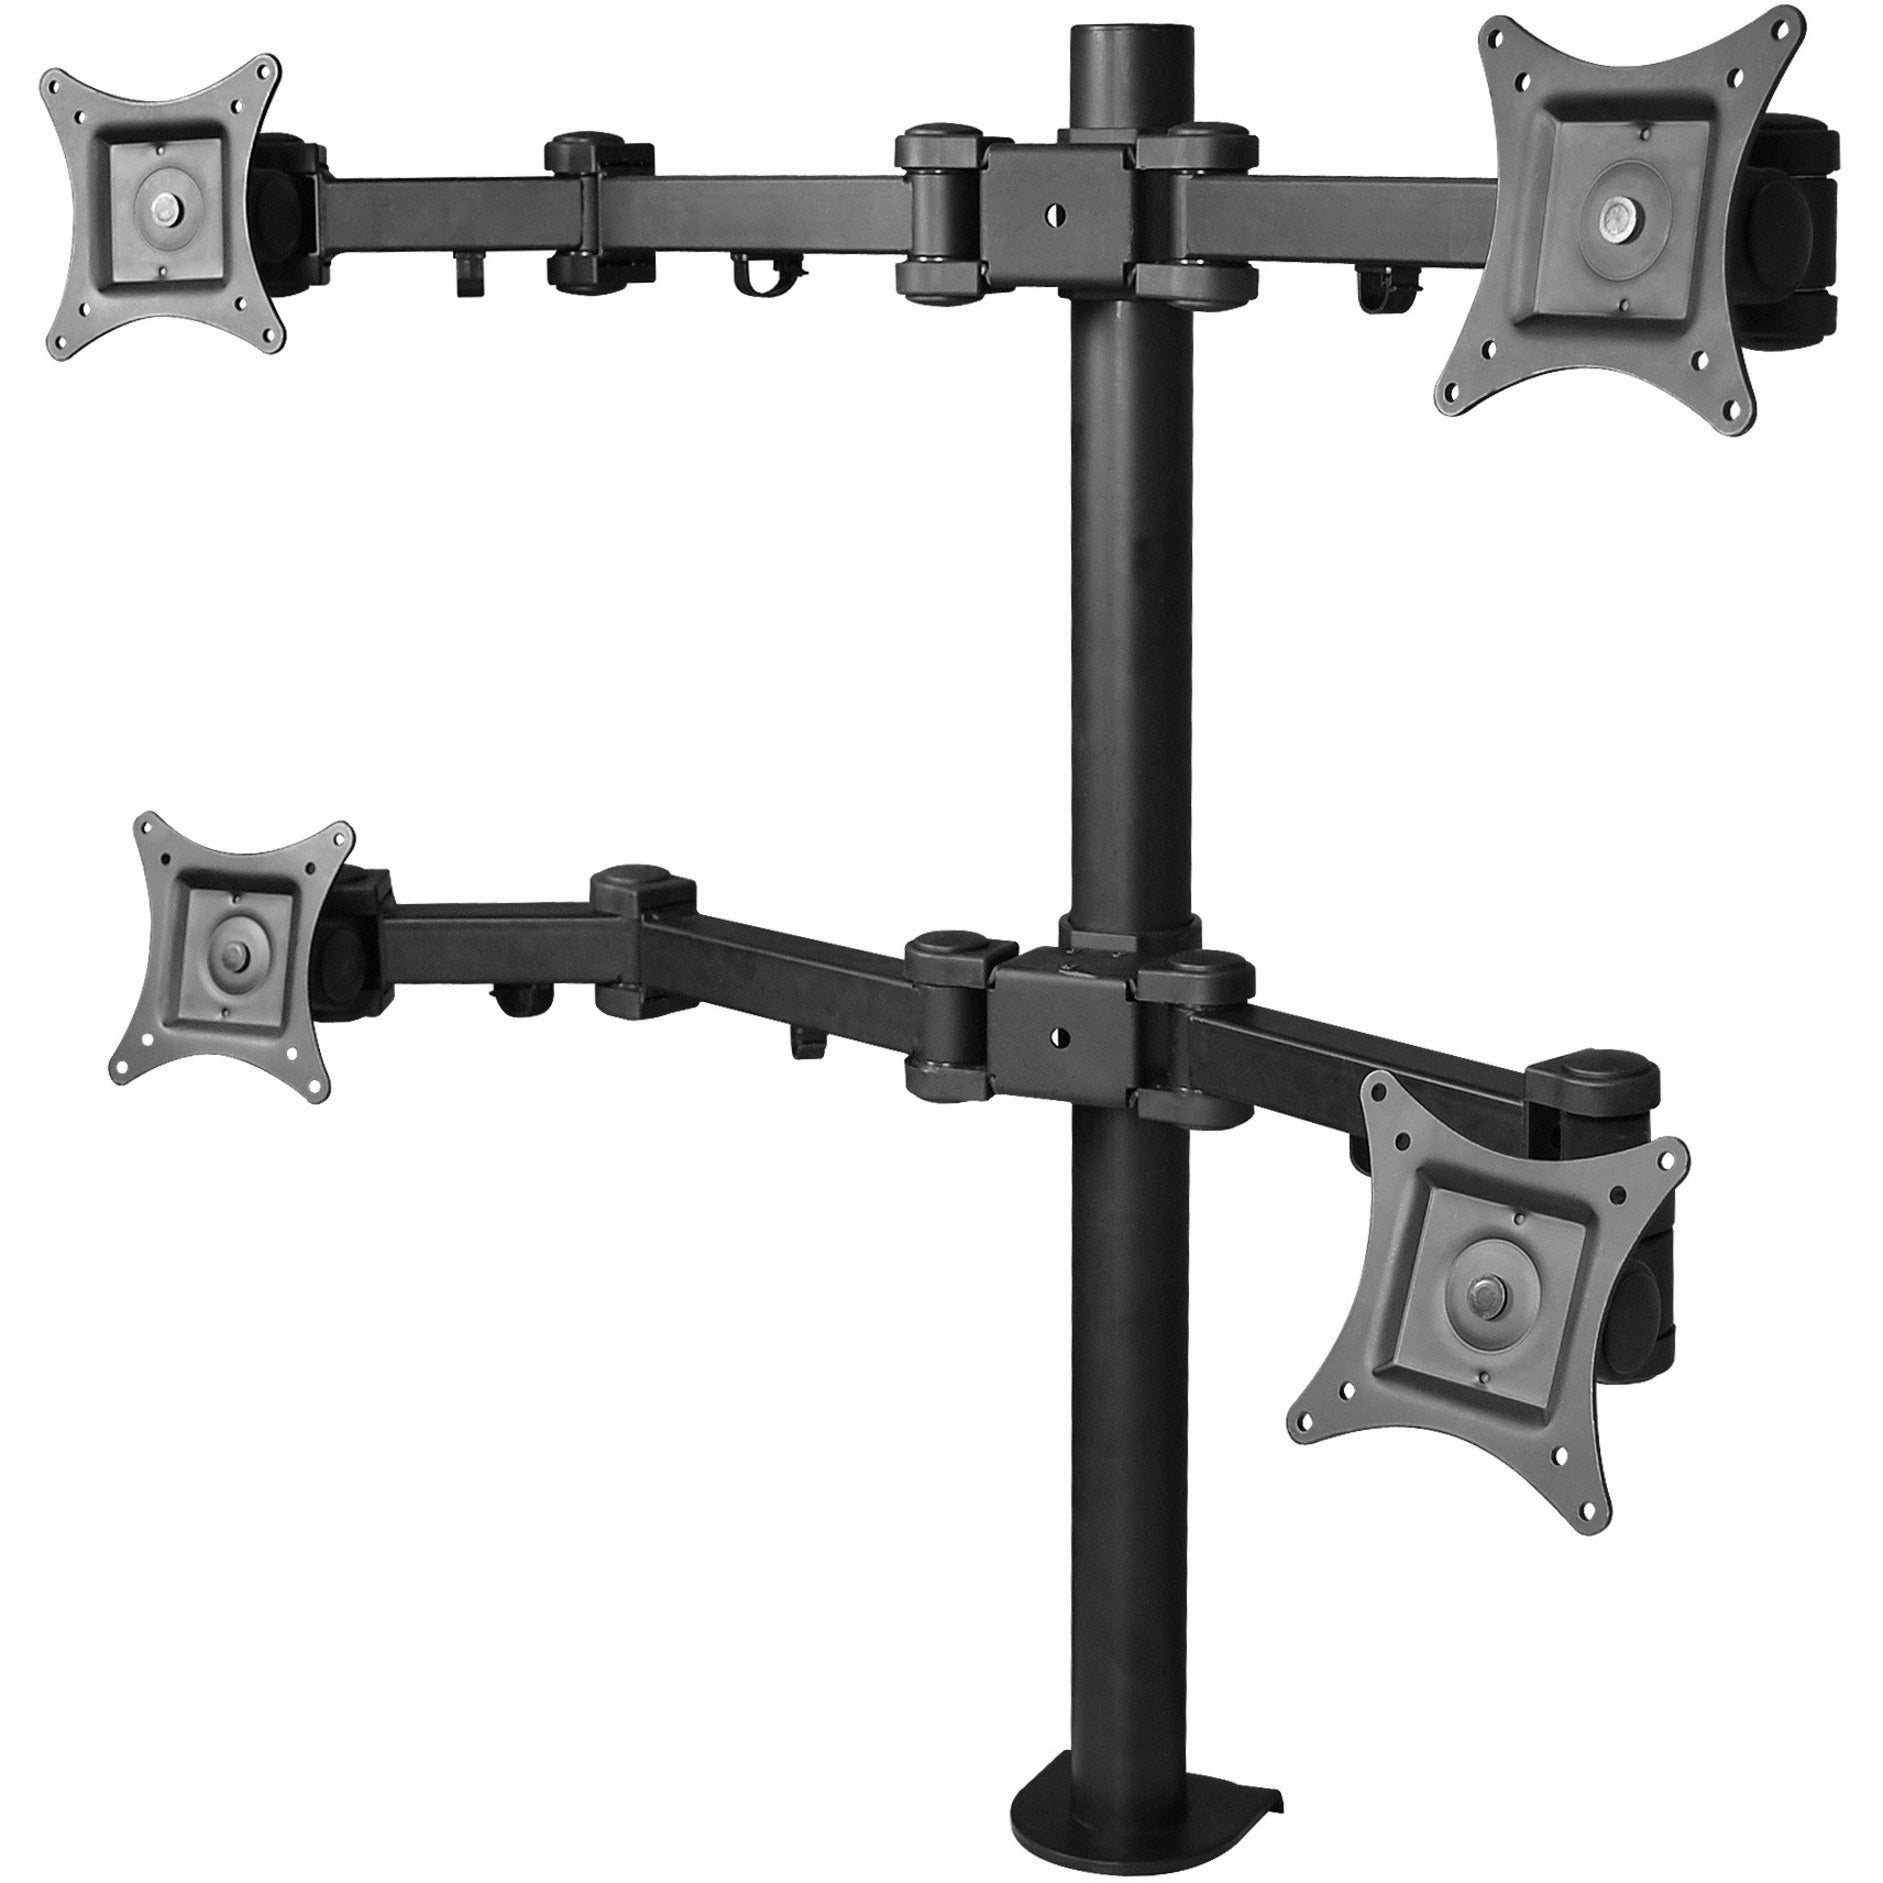 SIIG CE-MT0S12-S1 Articulating Quad Monitor Desk Mount, Frees Up Desk Space, 360° Rotation, Tilt and Swivel, Supports 13" to 27" Screens